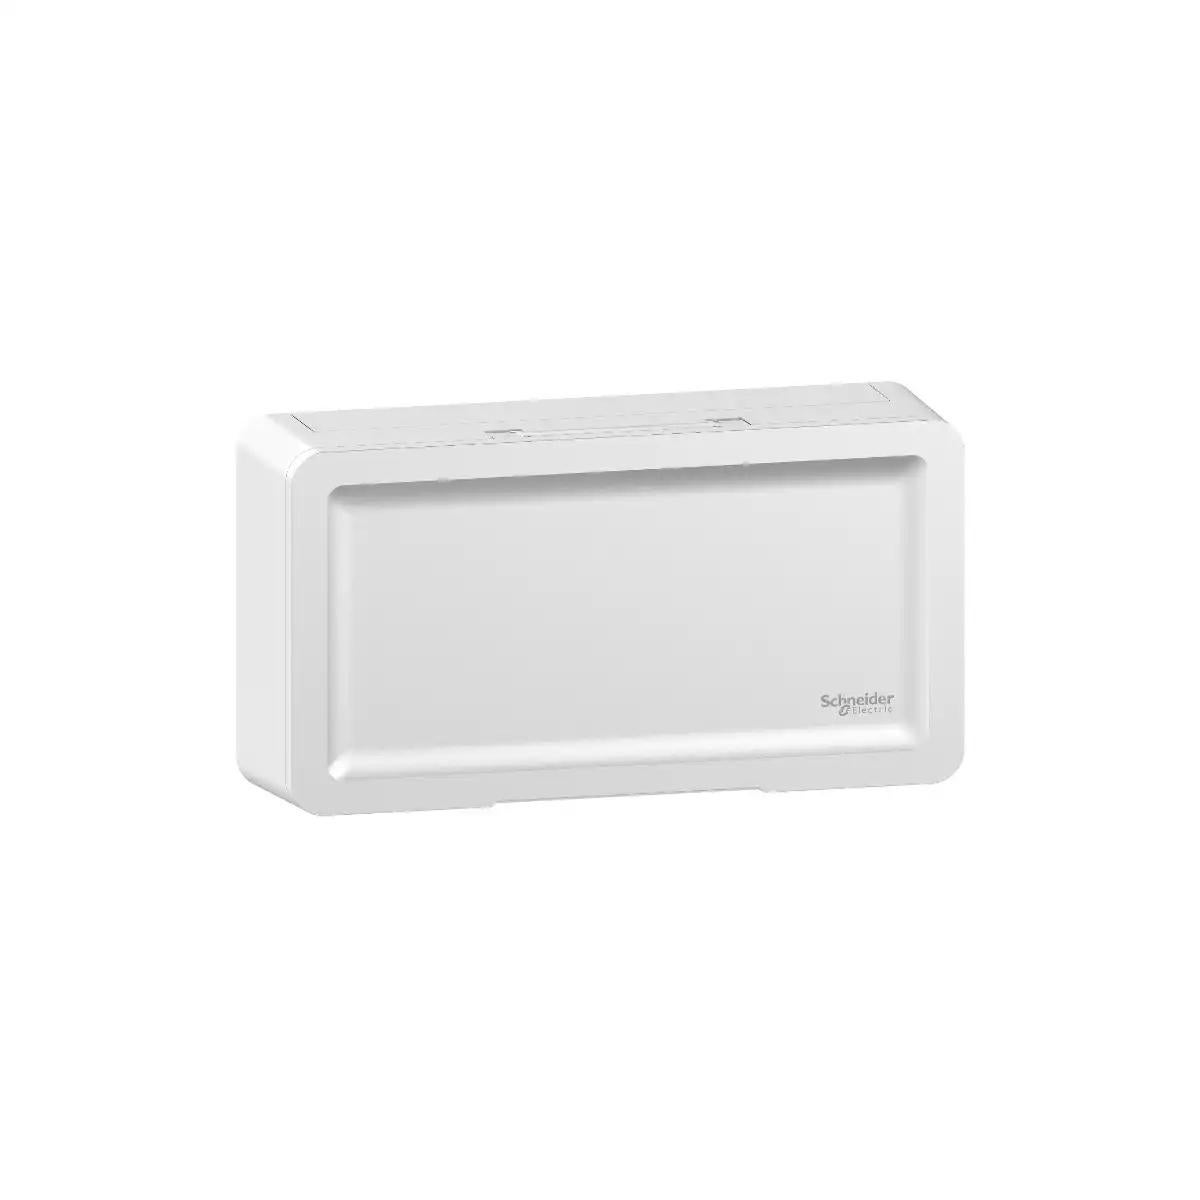 Square D EL Consumer Unit - surface mounted - with plain door - 14 ways